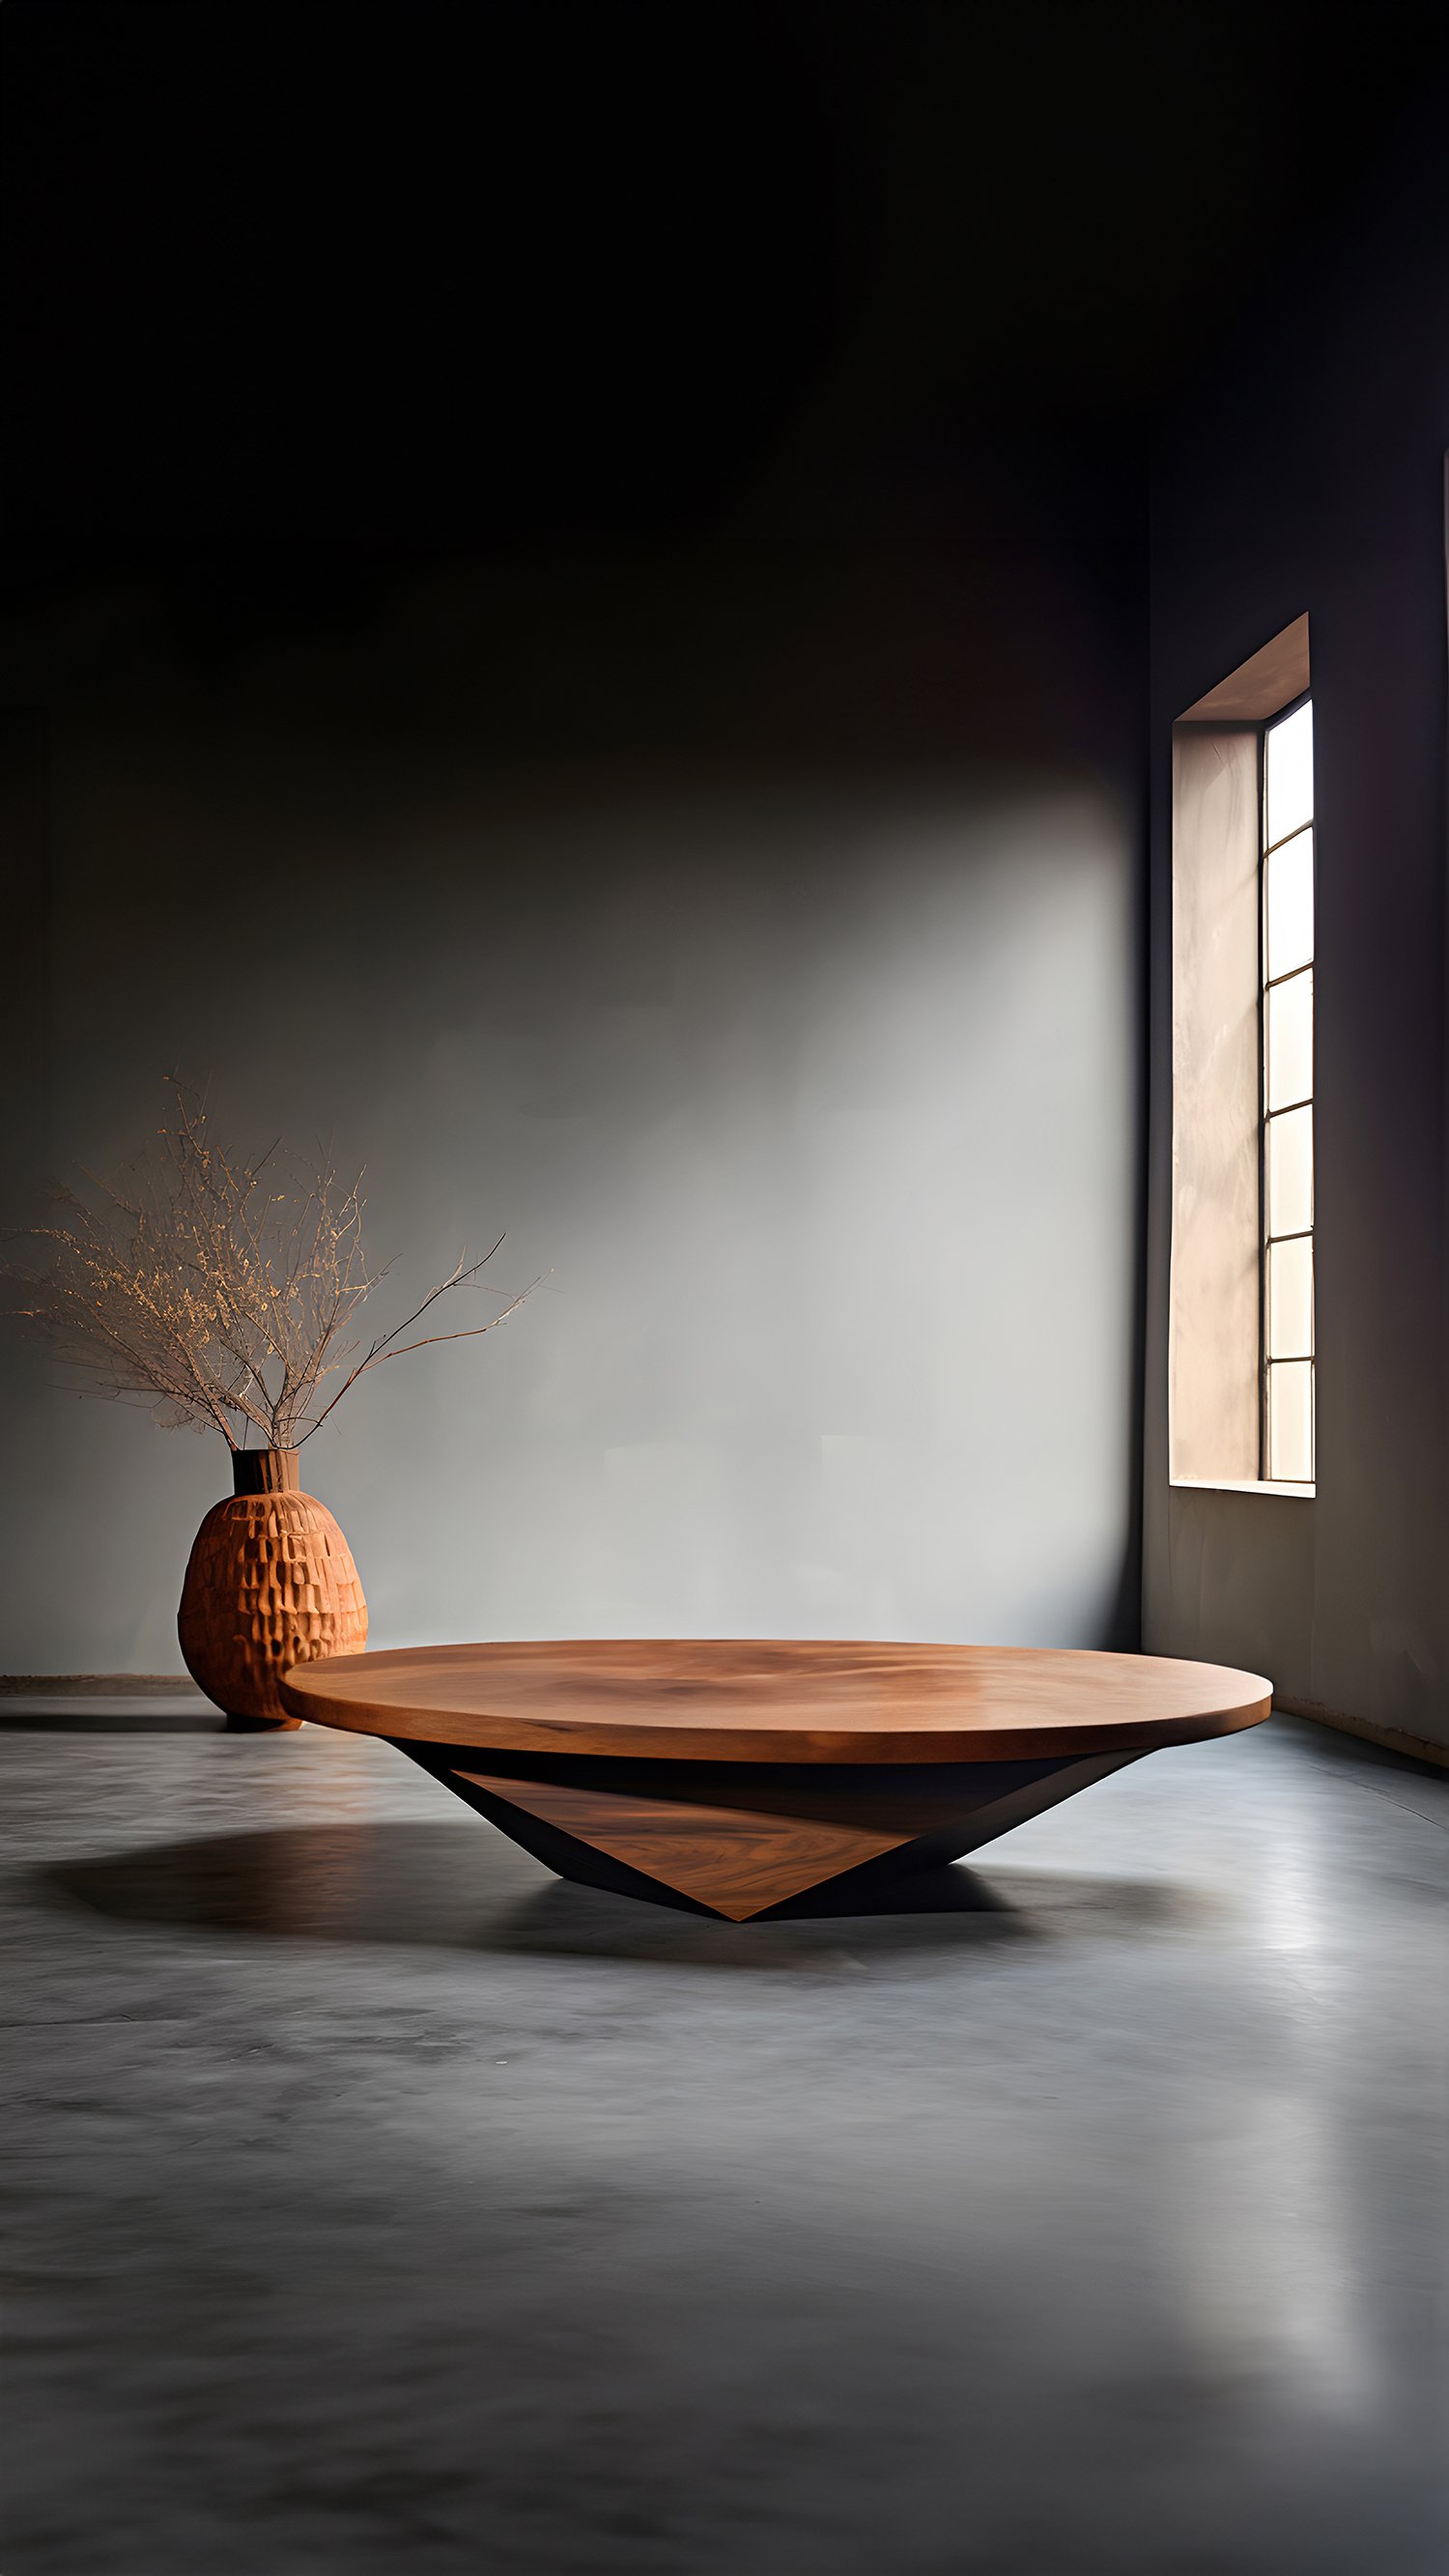 Oval Coffee Table Made of Solid Wood, Center Table Solace S21 by Joel Escalona —5.jpg